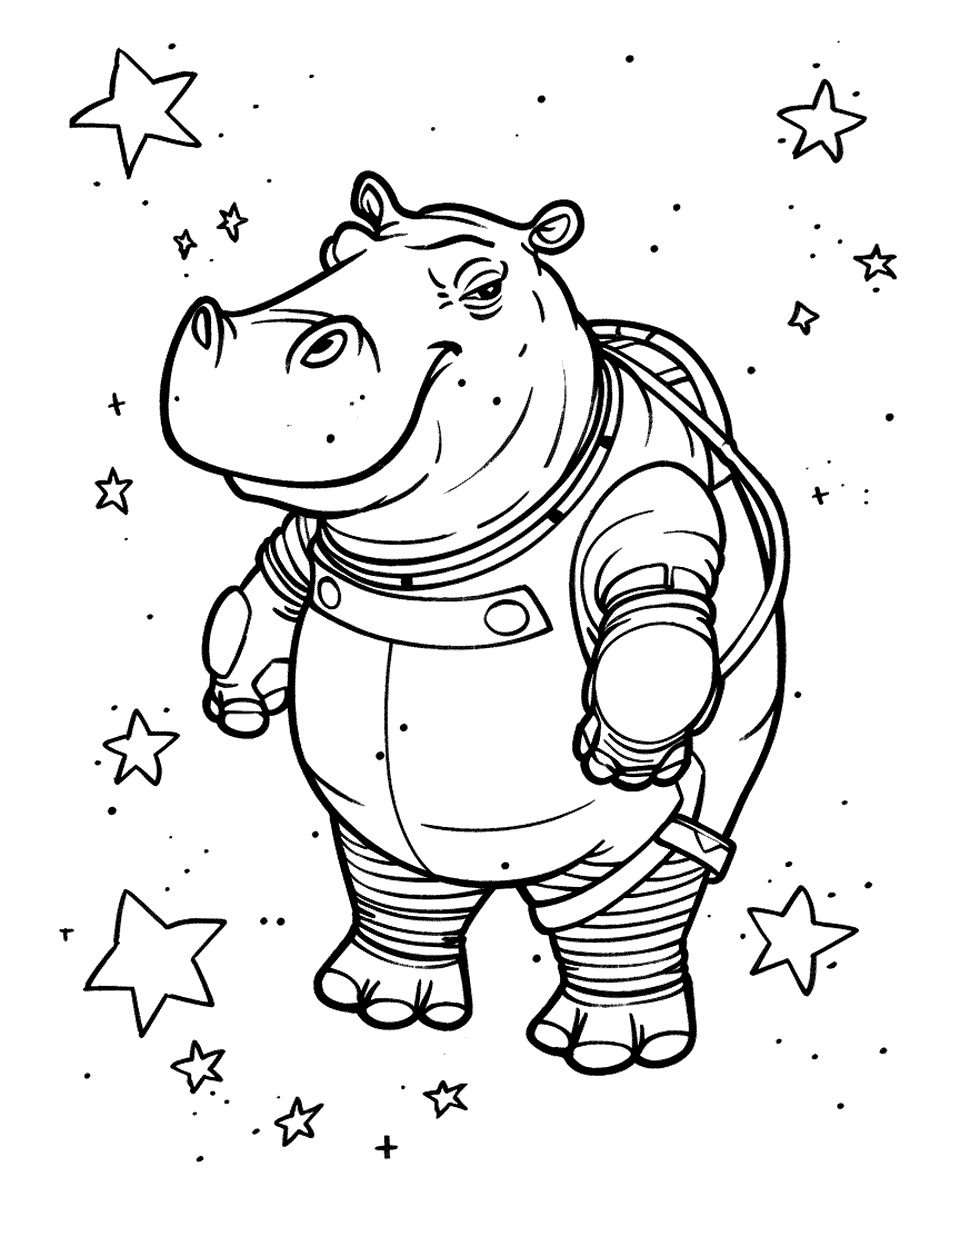 Hippo Astronaut Coloring Page - A hippo in a spacesuit floating in outer space, surrounded by stars.